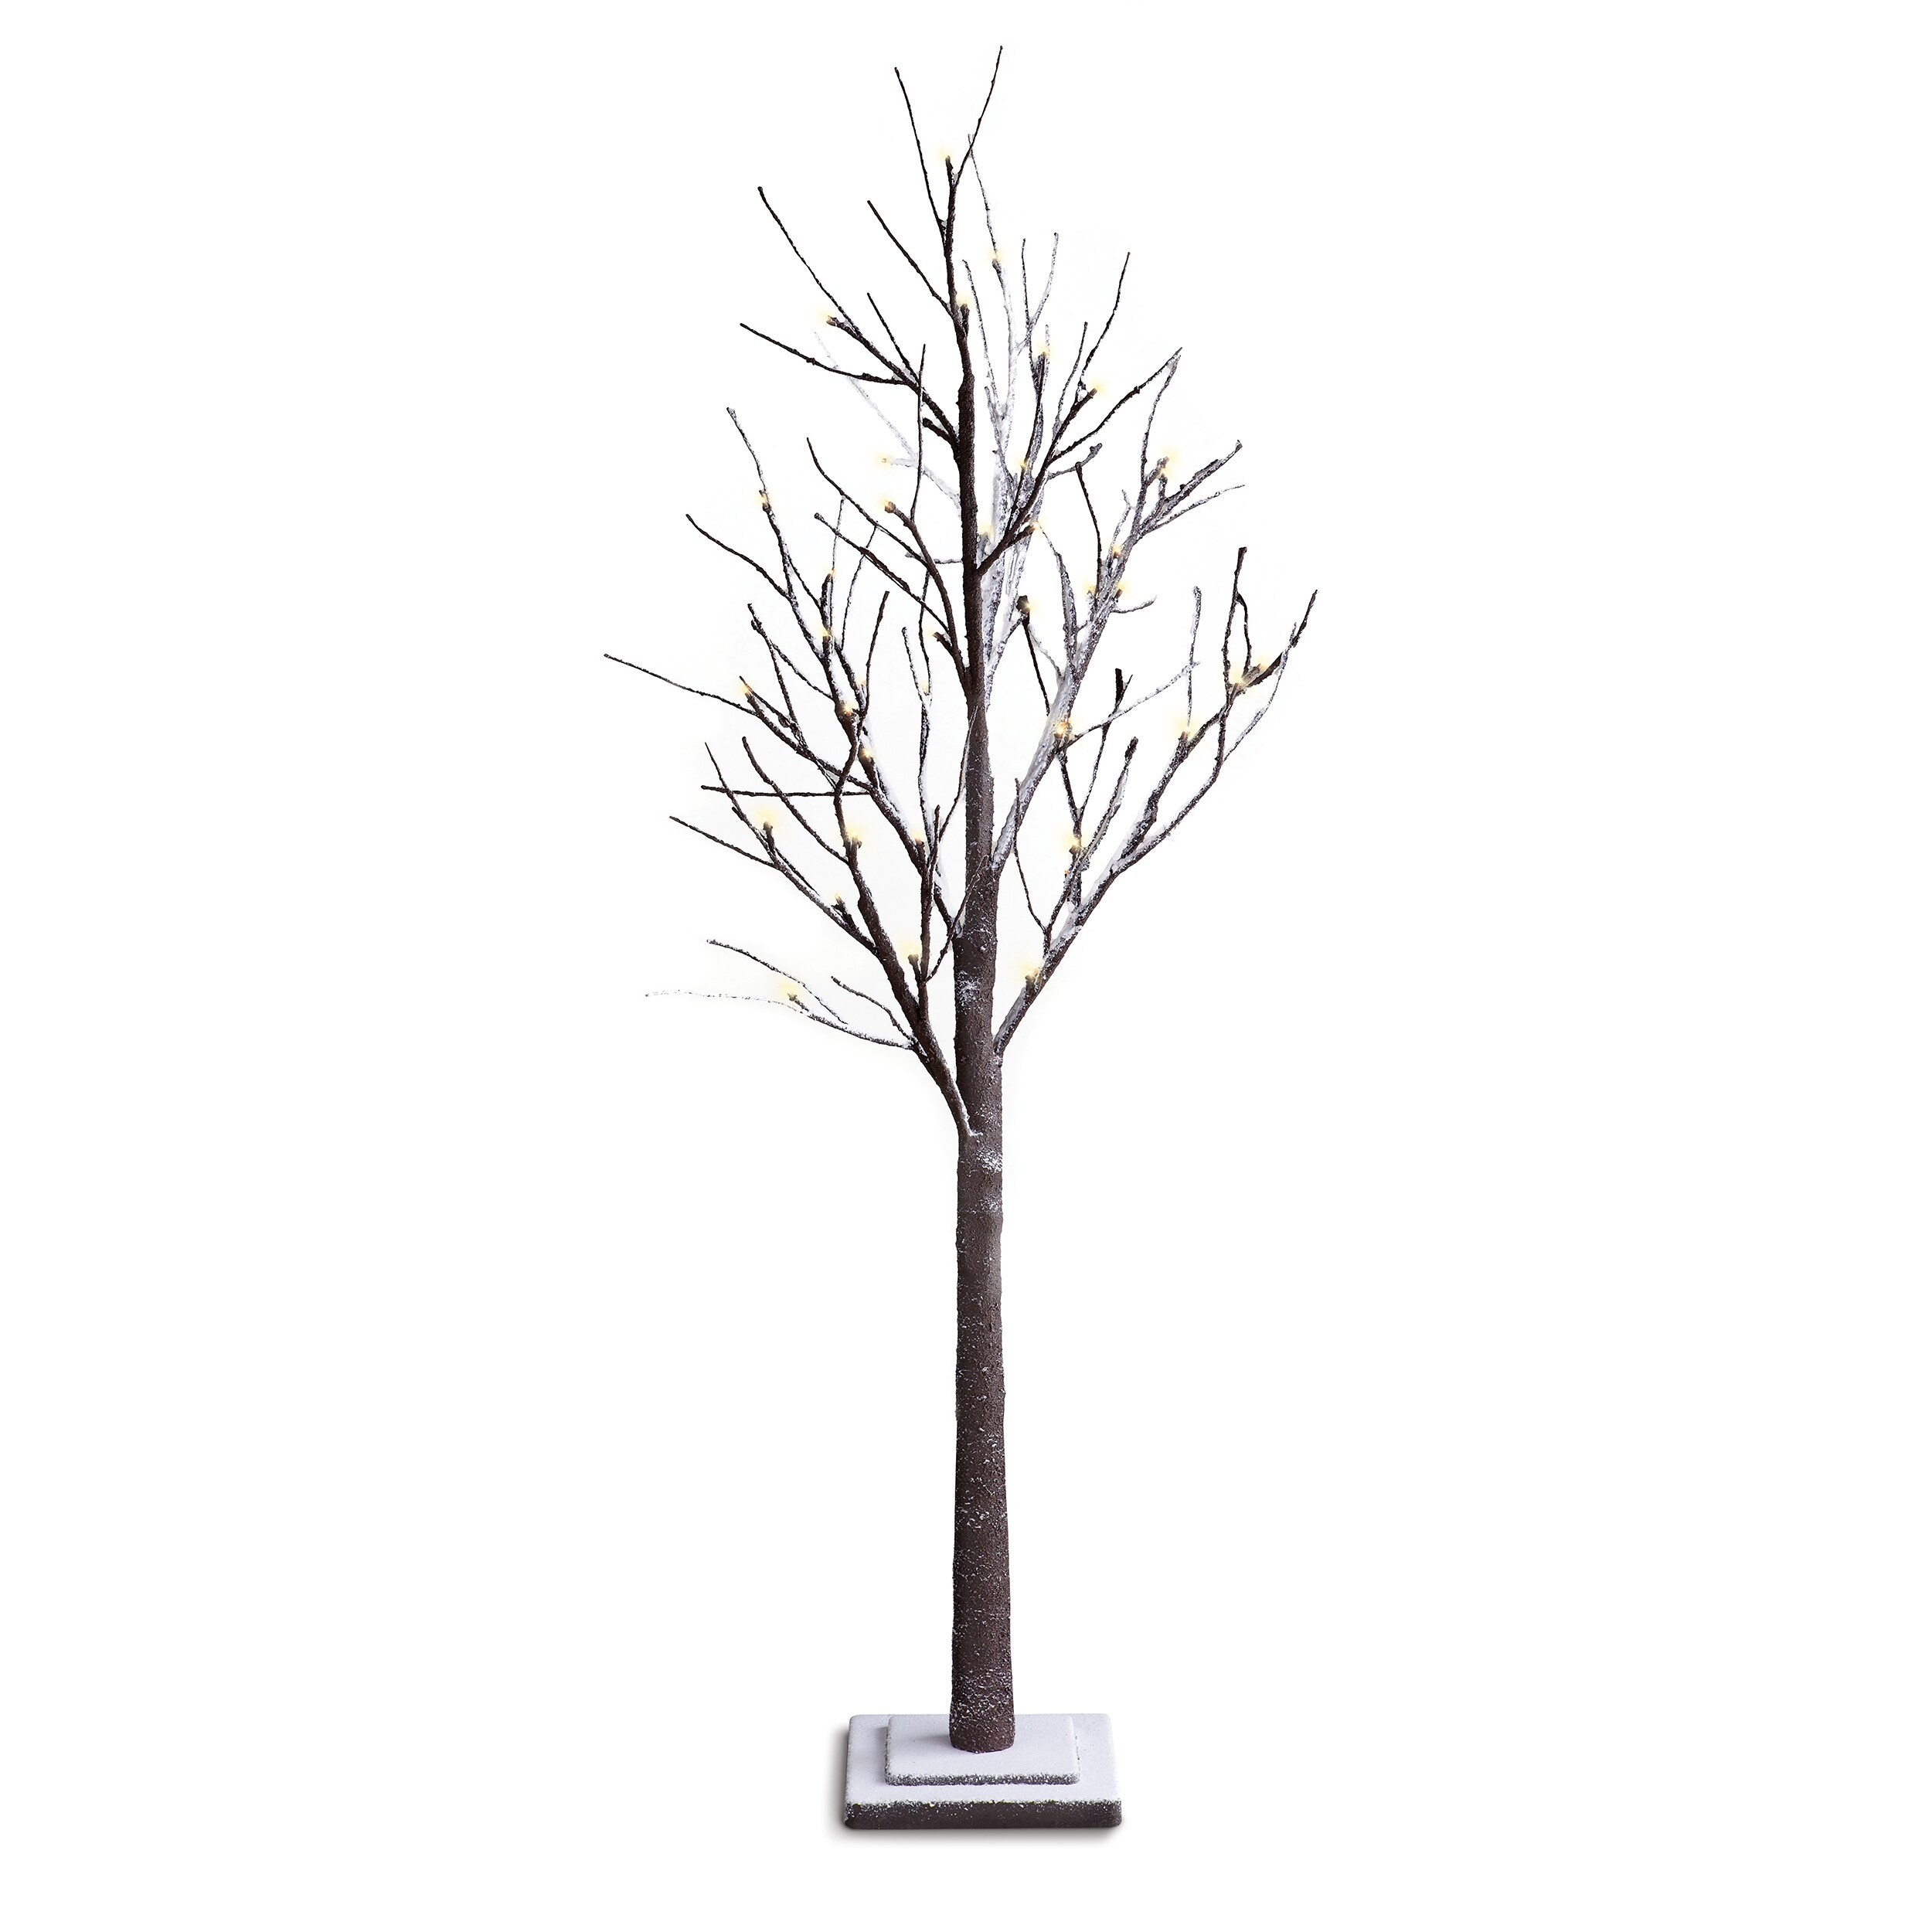 https://ak1.ostkcdn.com/images/products/8976701/Order-Home-Collection-Decorative-LED-4ft-Snow-Tree-61c28db2-ded0-417b-ab7d-180e6ebc8323.jpg